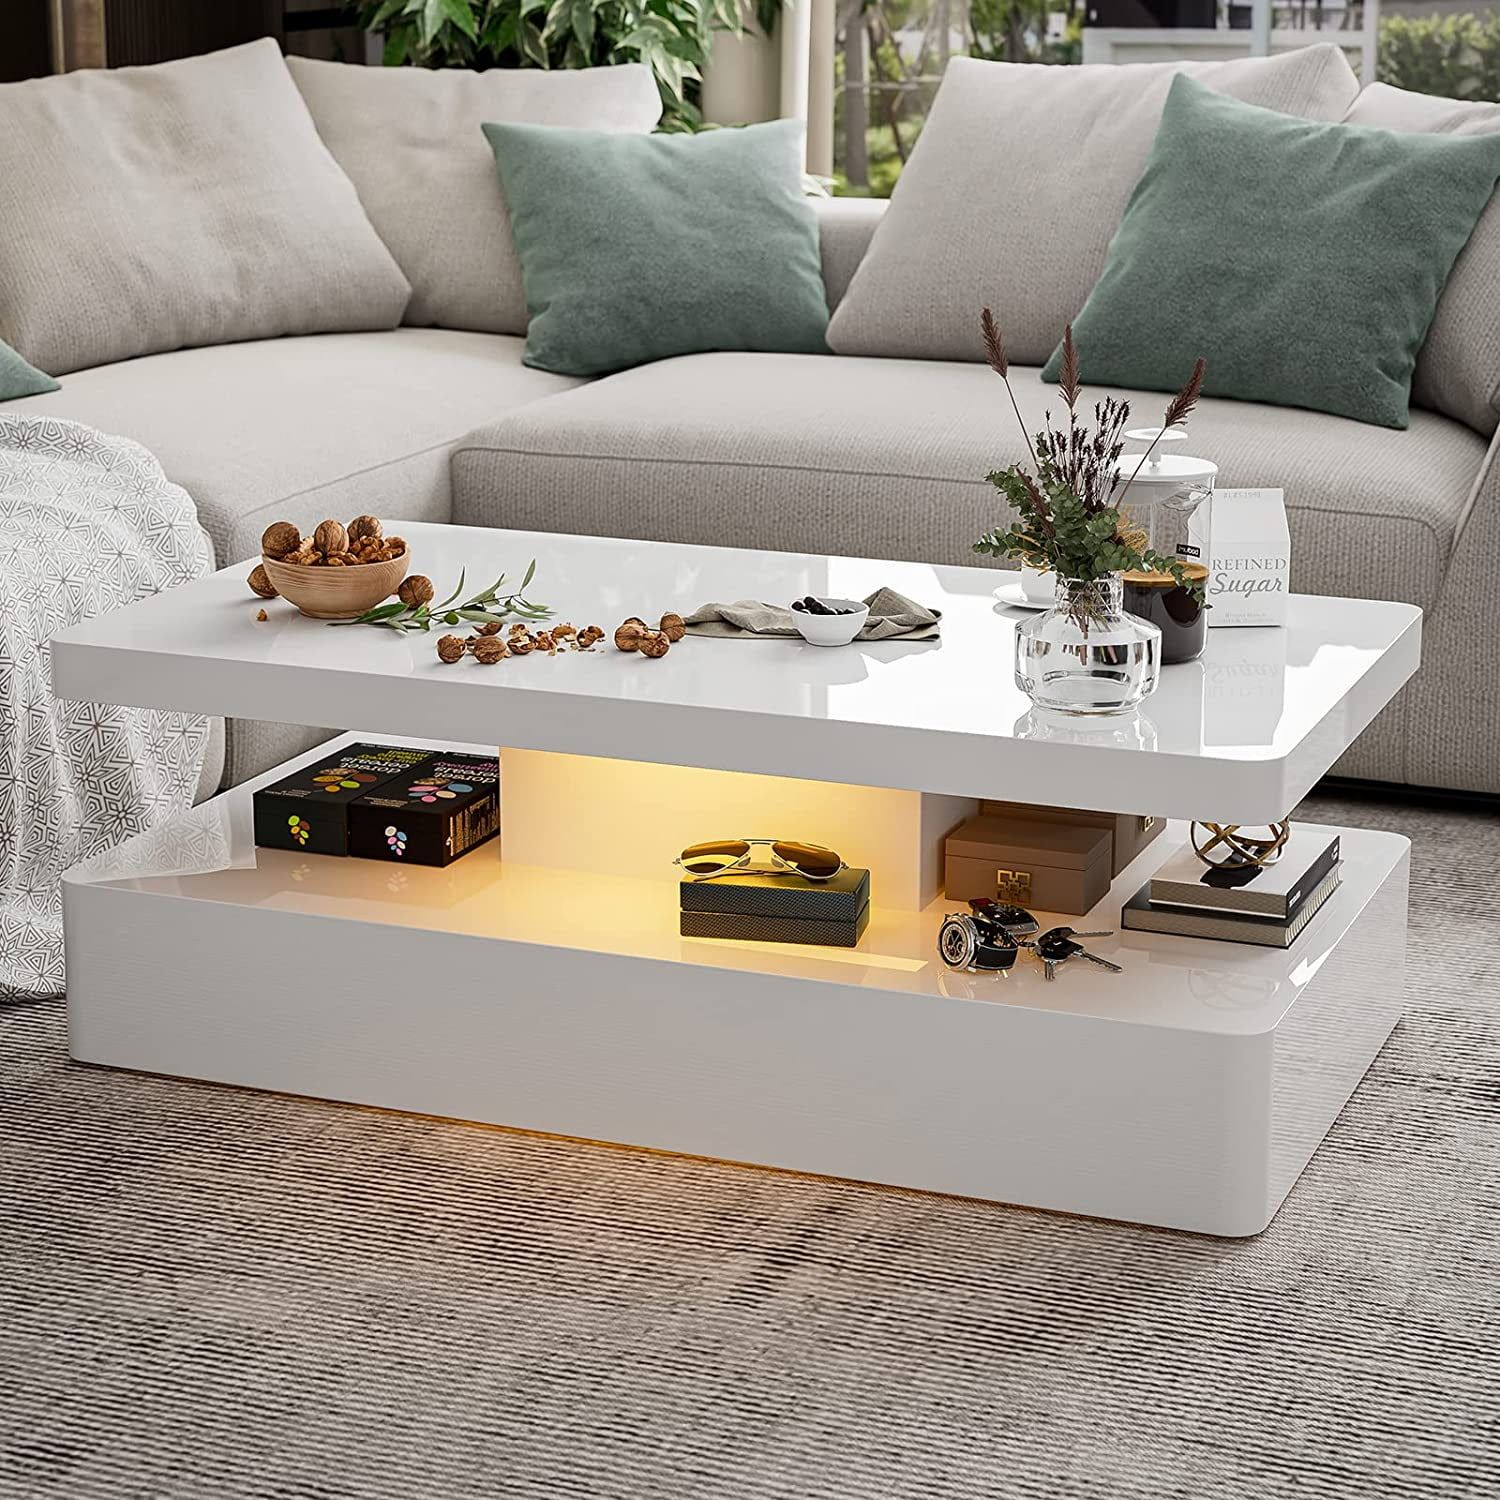 Ikifly Modern Glossy White Coffee Table W/led Lighting, Contemporary  Rectangle Design Living Room Furniture Mdf, 2 Tiers – Walmart Regarding Glossy Finished Metal Coffee Tables (View 15 of 15)